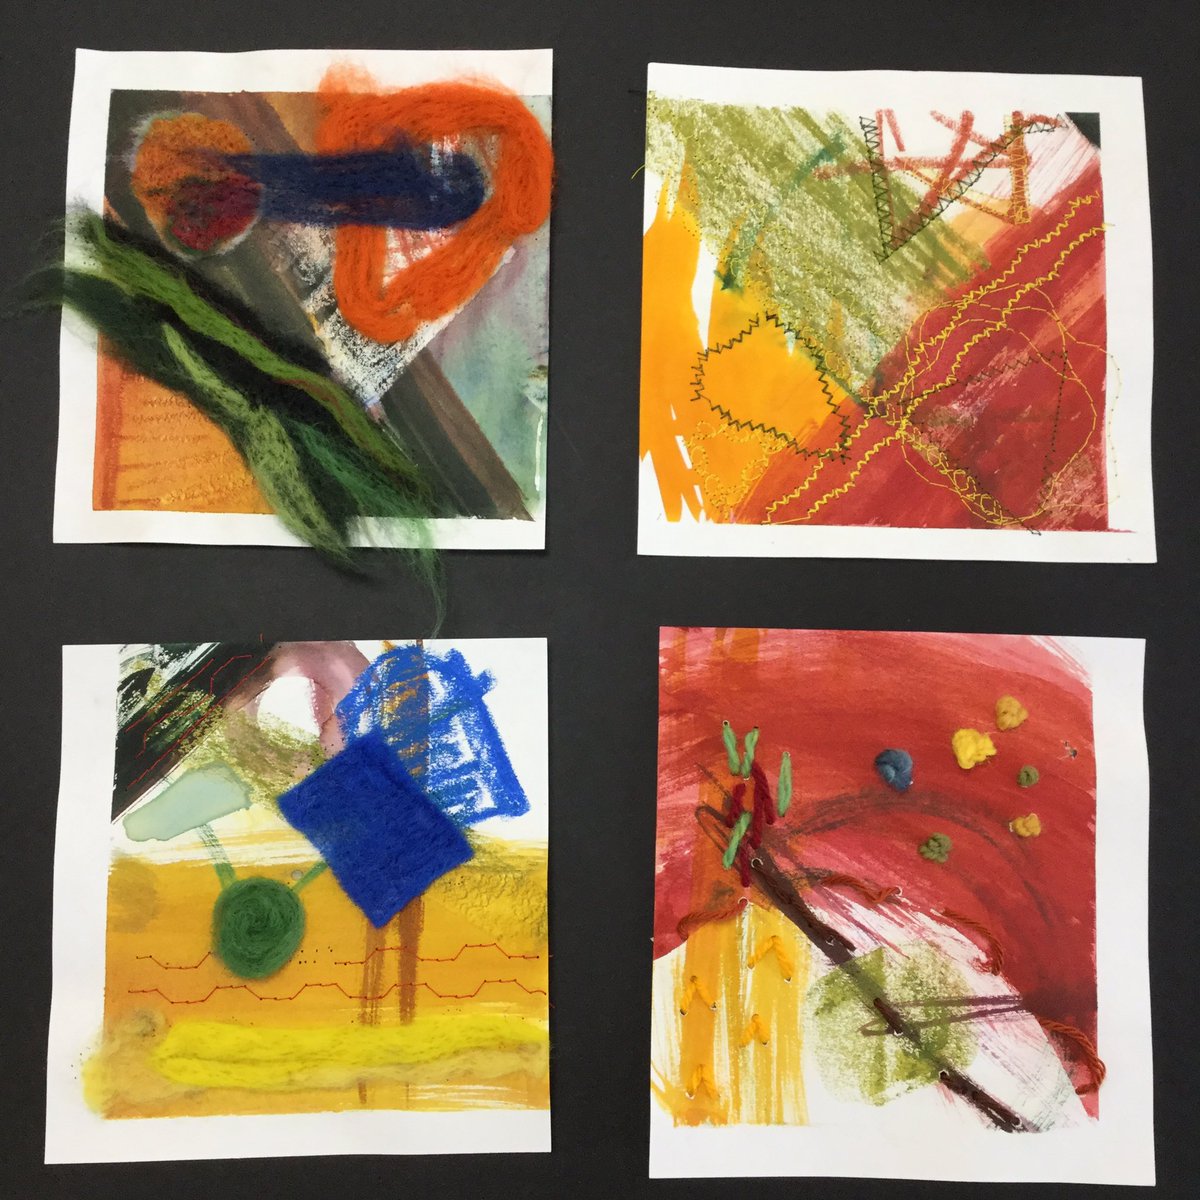 Fantastic samples from #PipersYear9 Textiles; experimenting with colour and techniques on paper. #PipersSenior #PipersTextiles